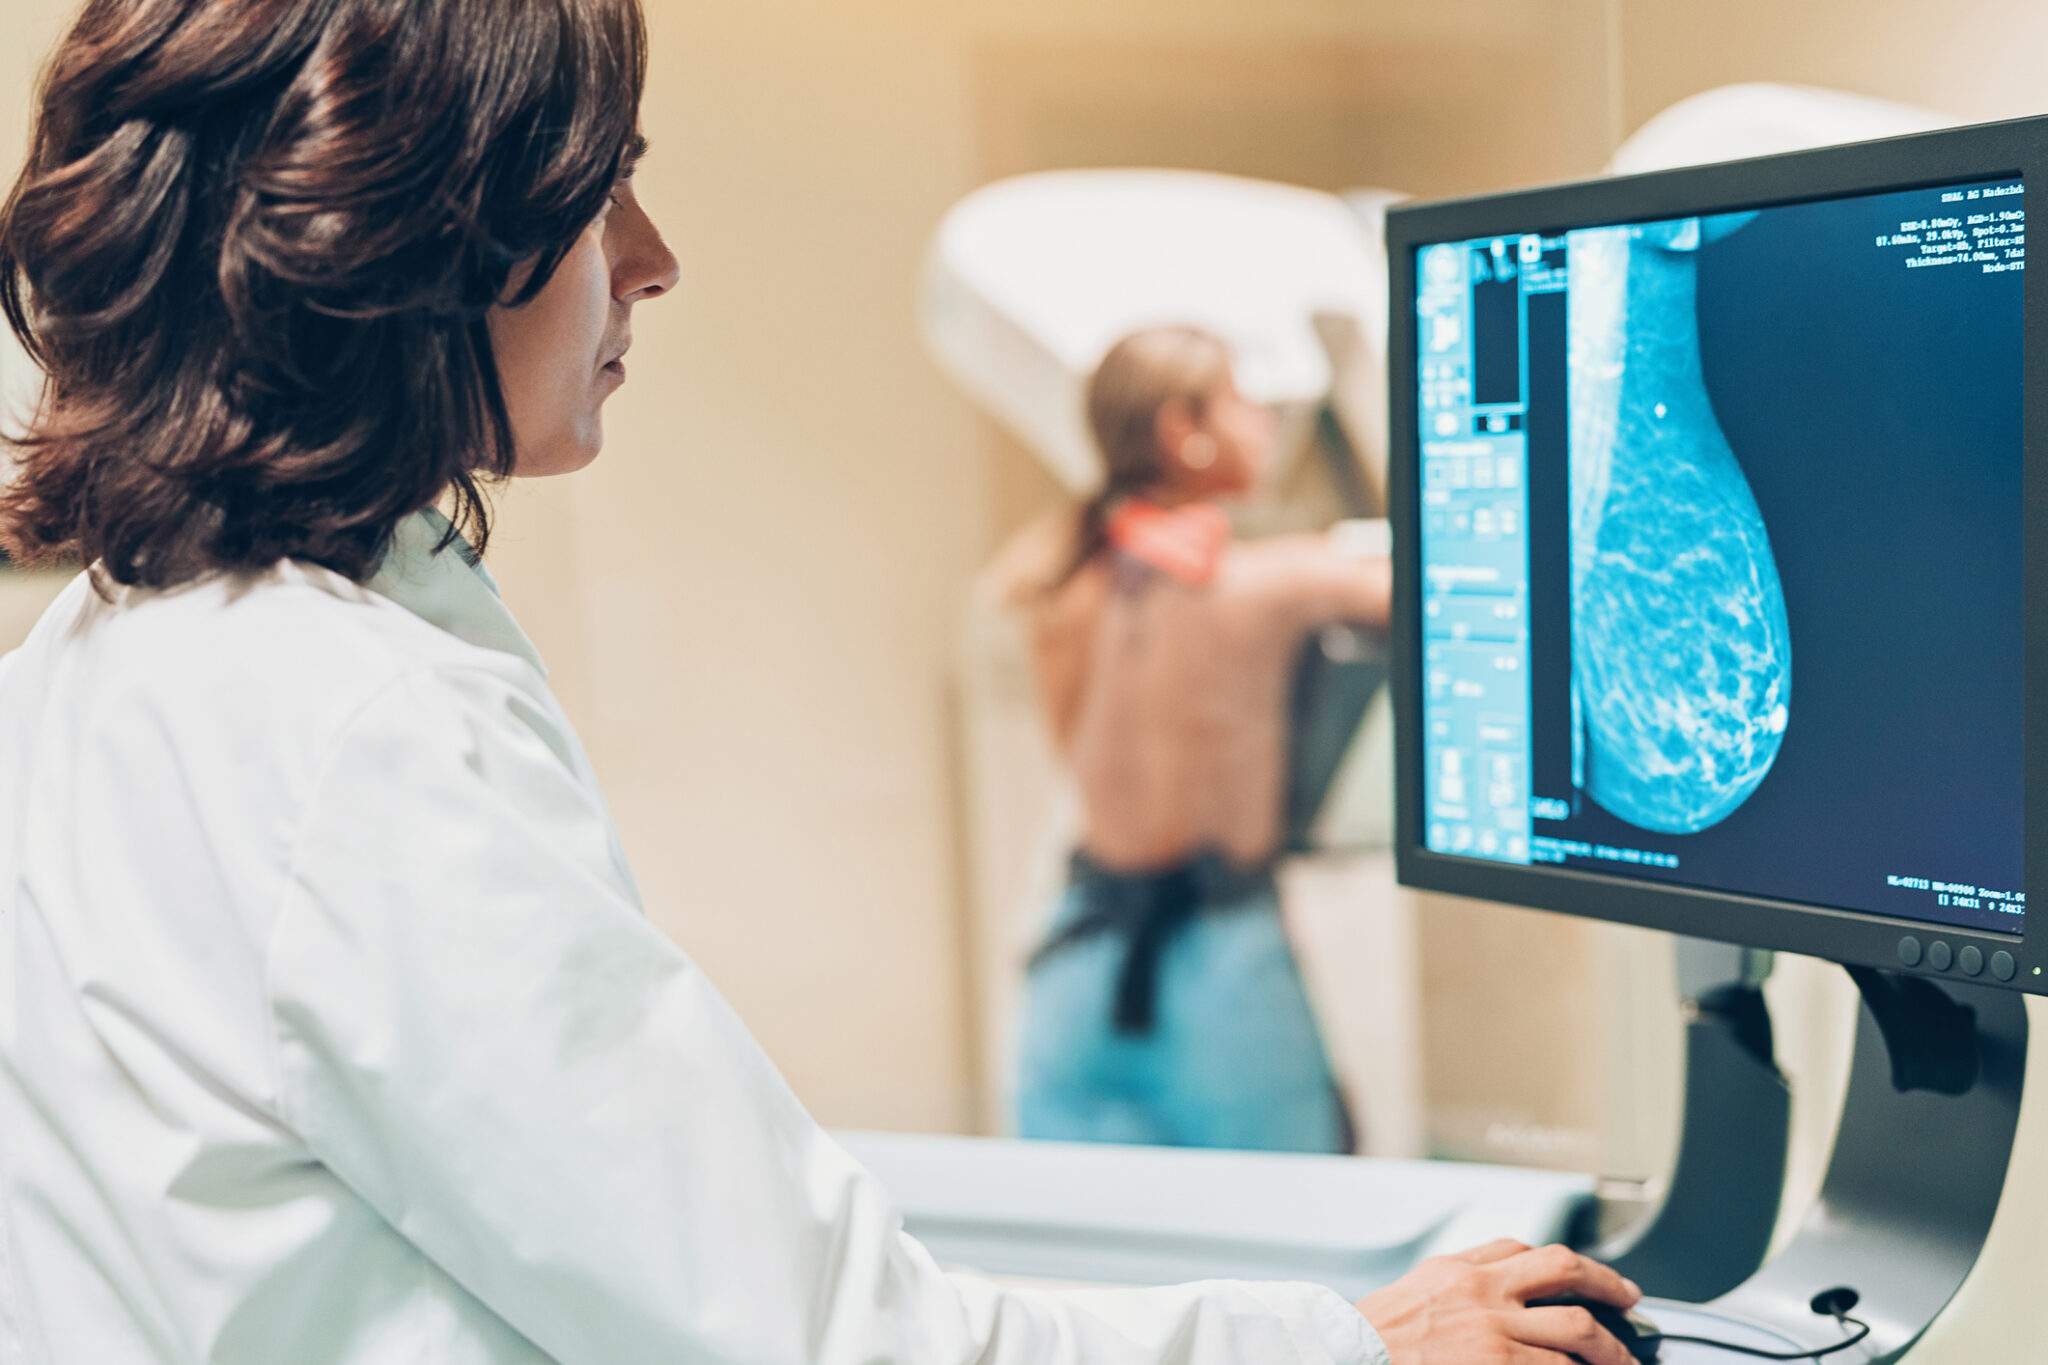 Dense Breast Tissue: What It Means and What to Know